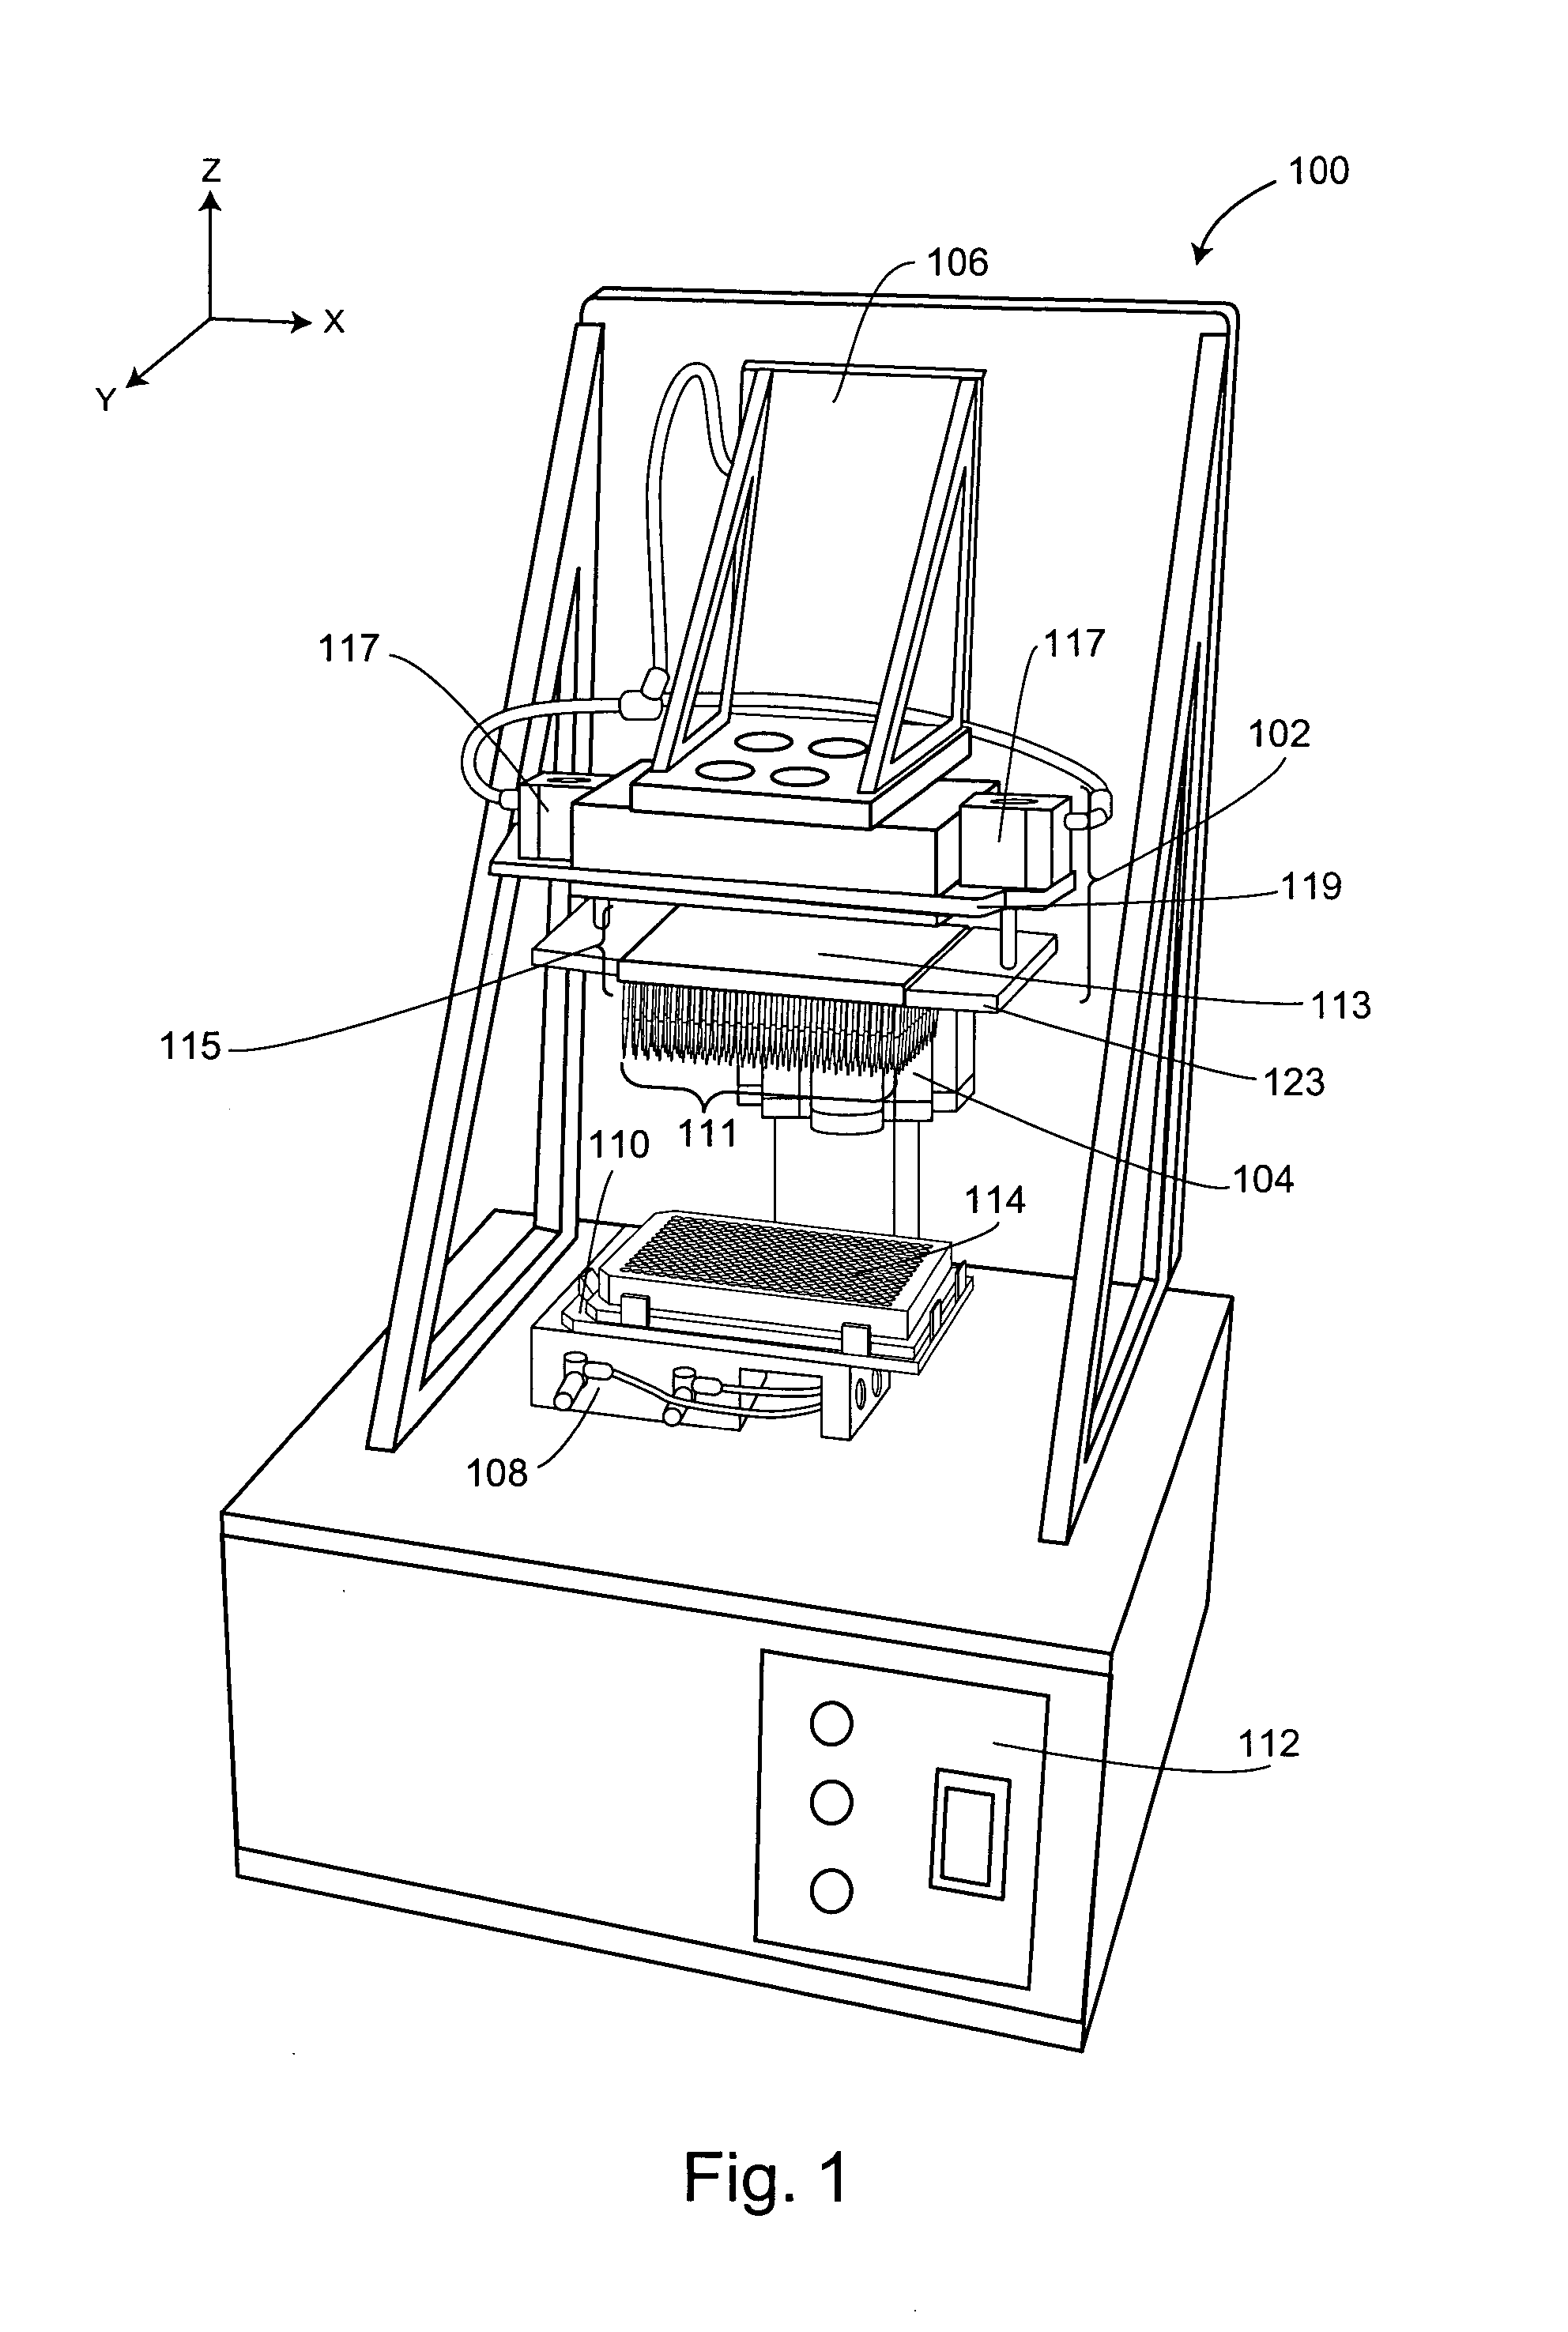 Automated cellular assaying systems and related components and methods